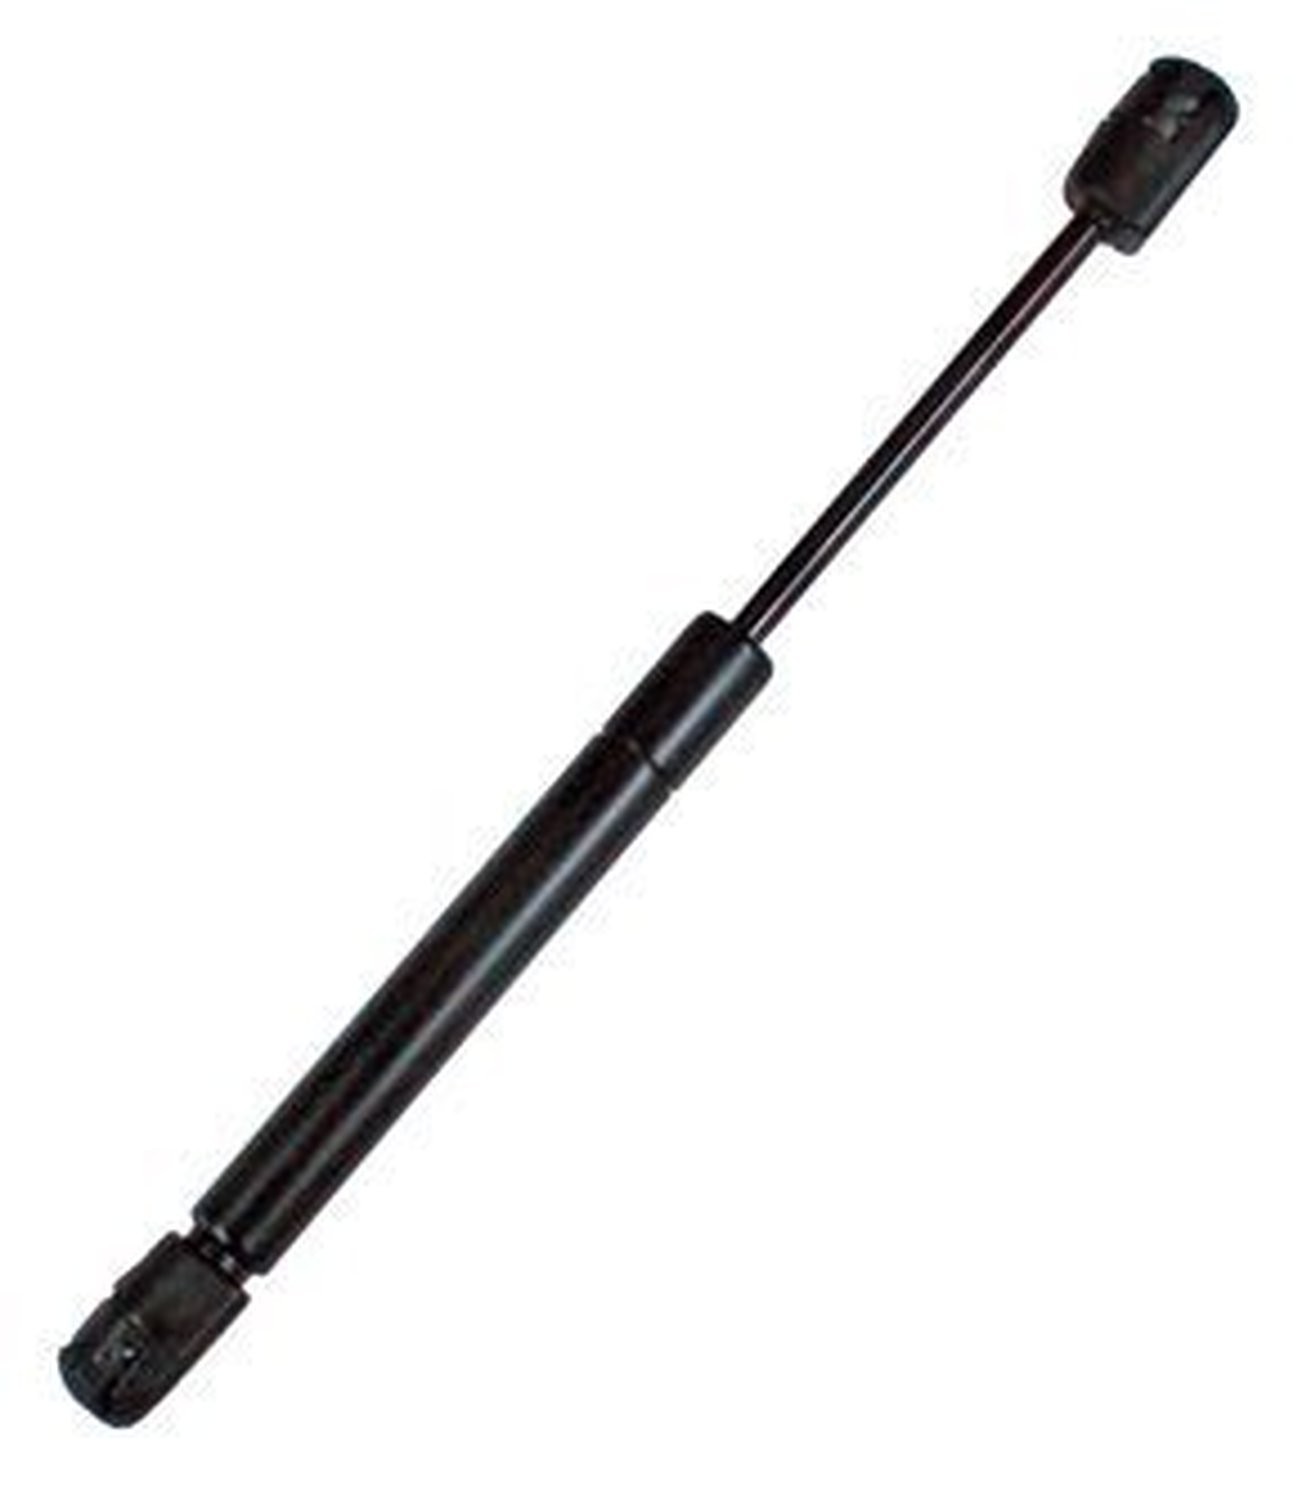 Ford Maverick Pickup ( Onwards Model) Tailgate Lifter Gas Struts With OEM Fittings - In Black Carbon Steel With Nitrocarburized Plating